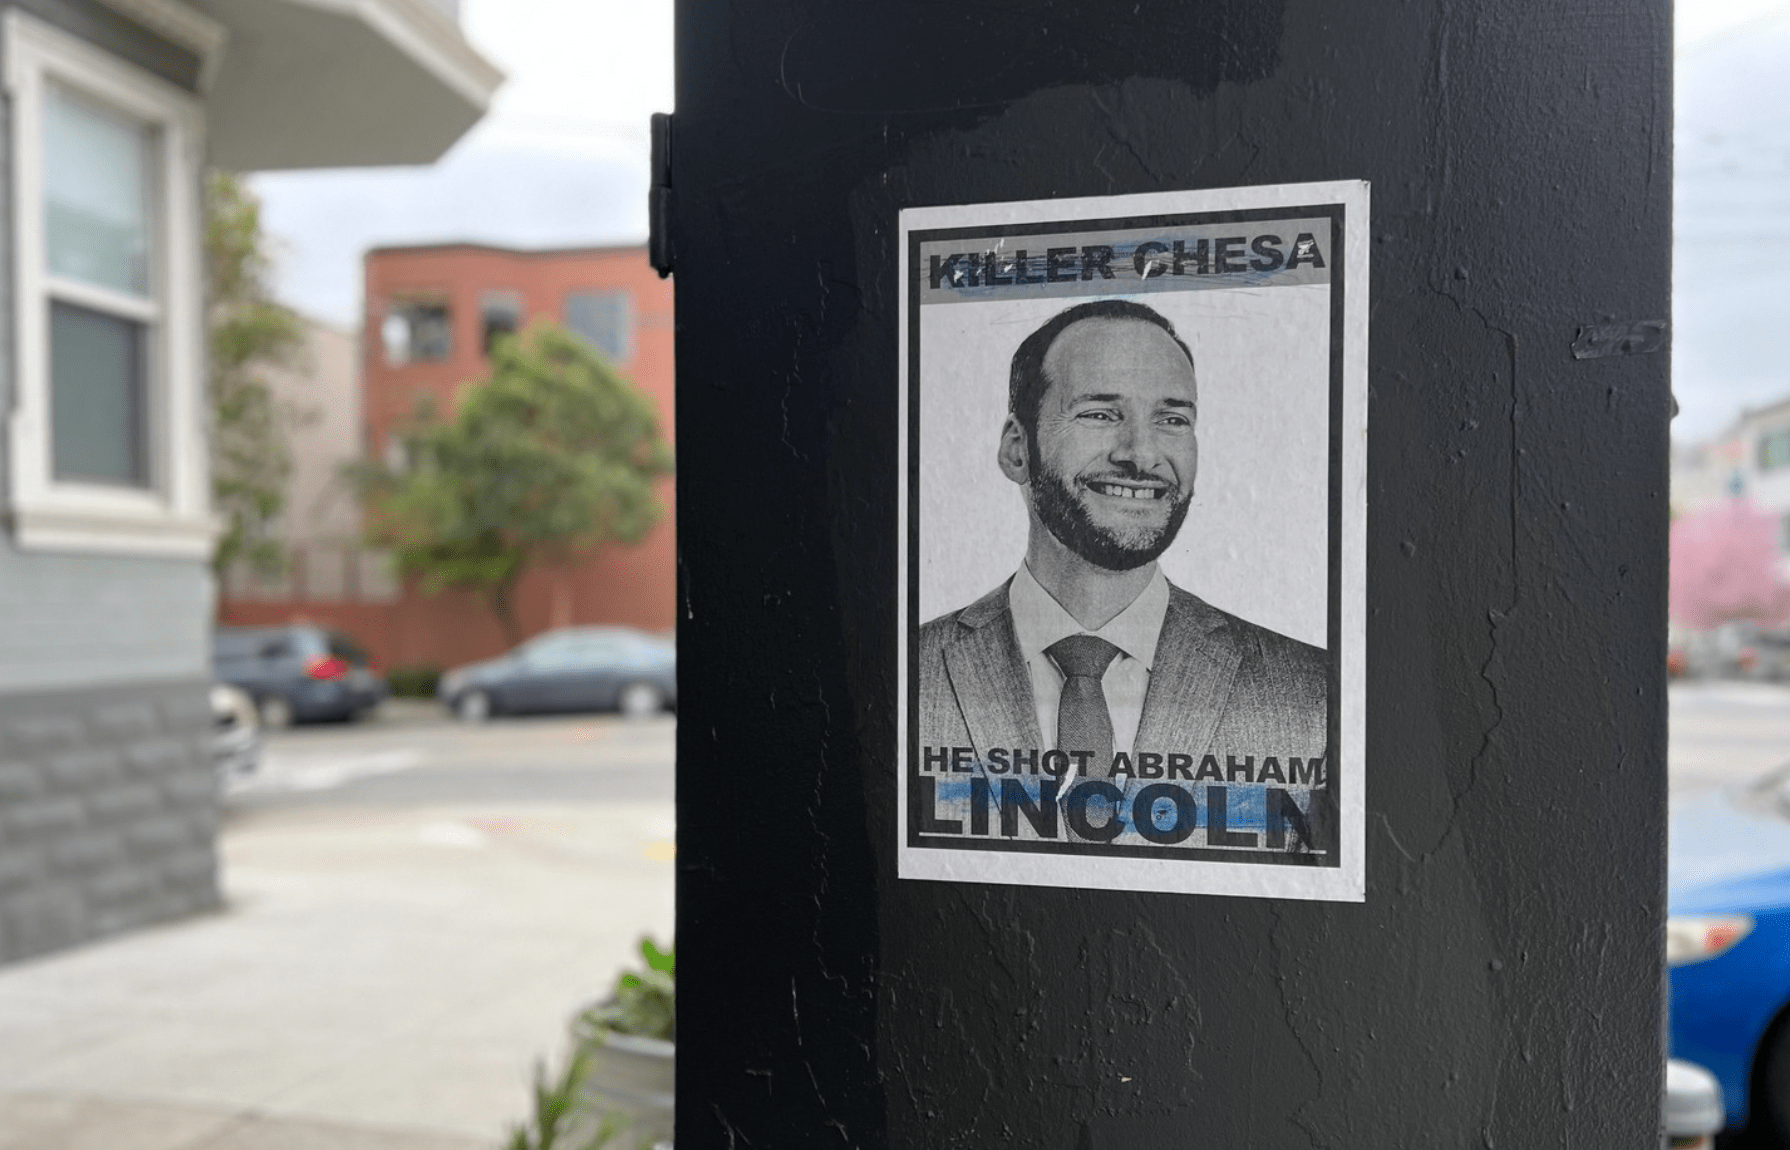 A street poster in San Francisco that reads "Killer Chesa, he shot Abraham Lincoln."